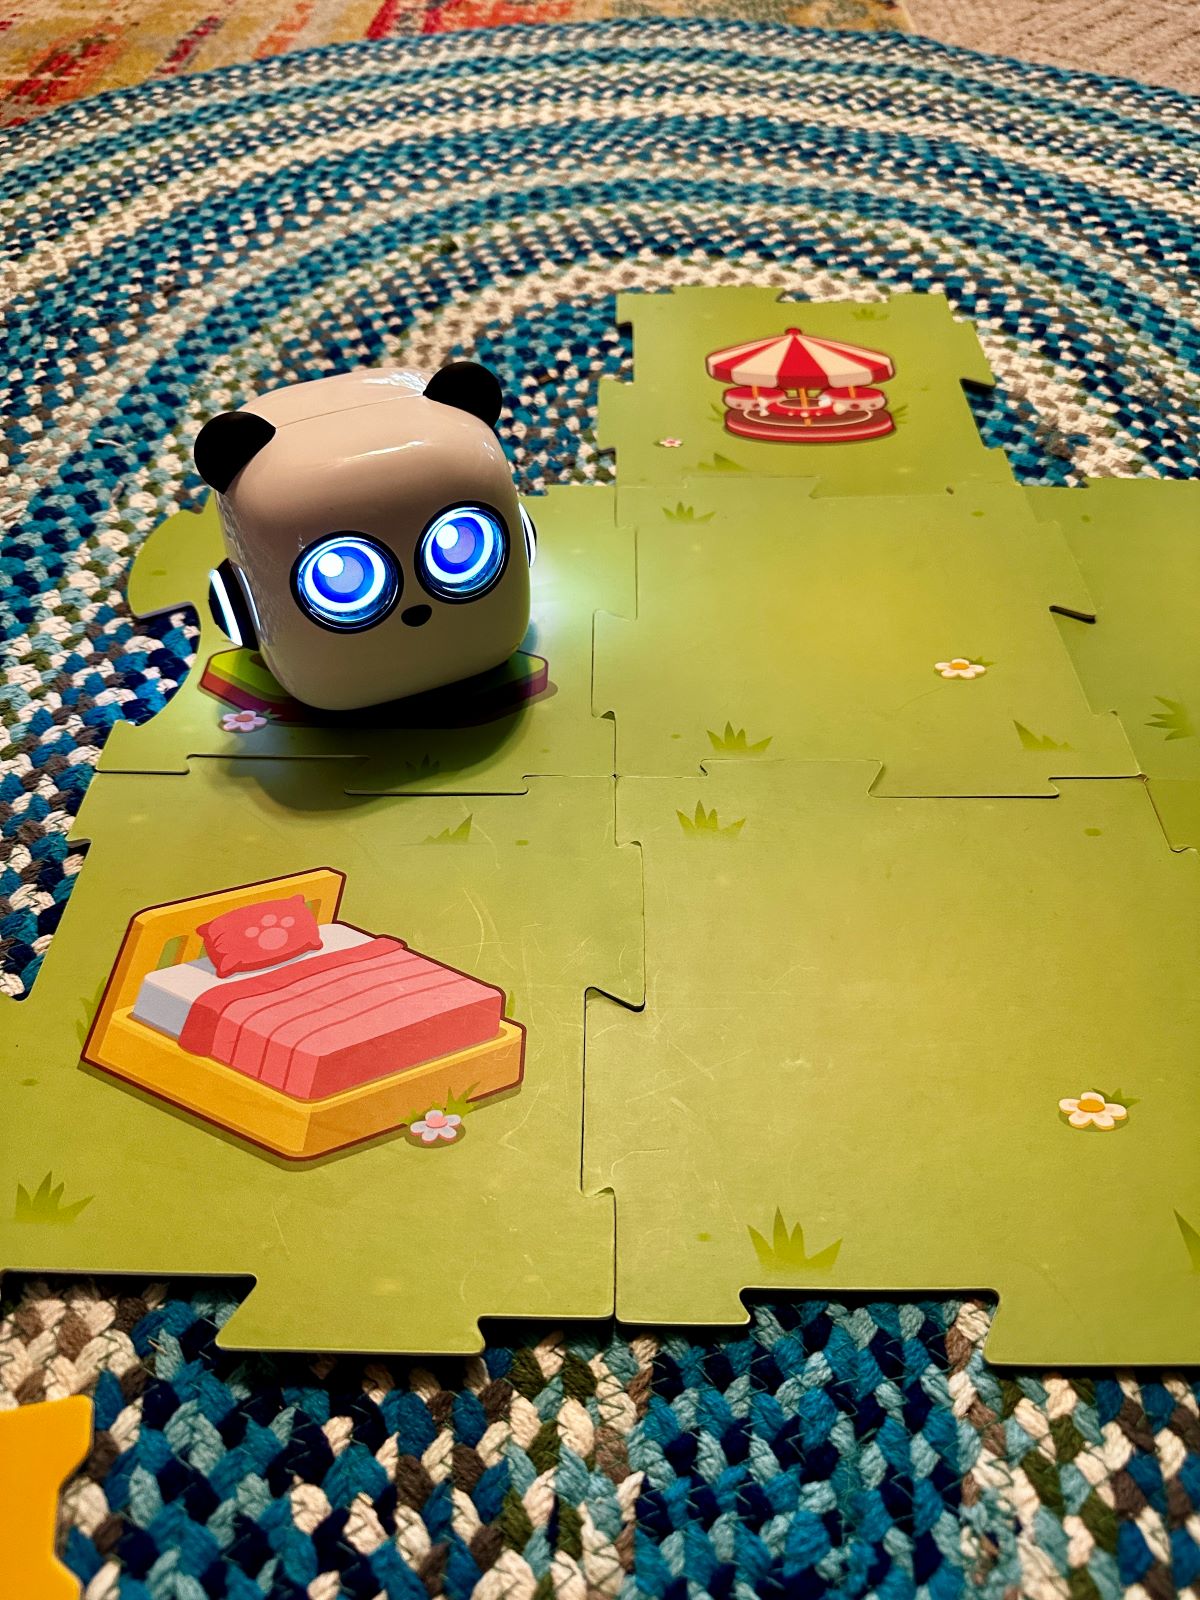 The mtiny coding toy on the play board.